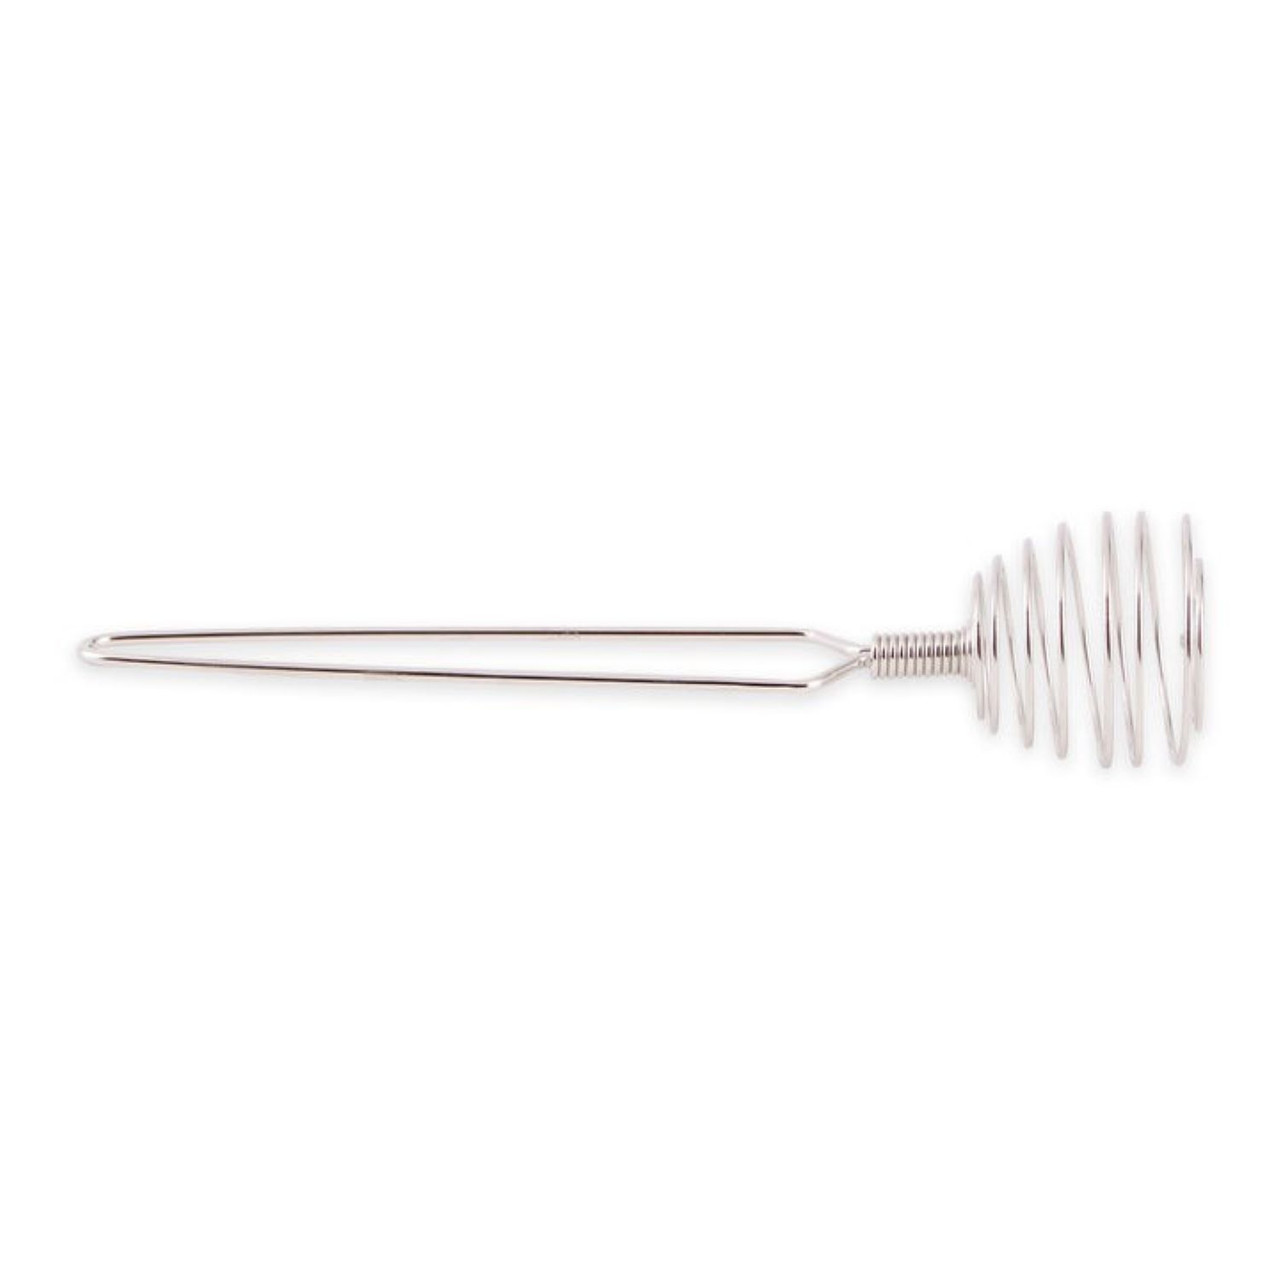 RSVP Endurance® Stainless Steel Collection - Spring Whisk - 9.25-inch